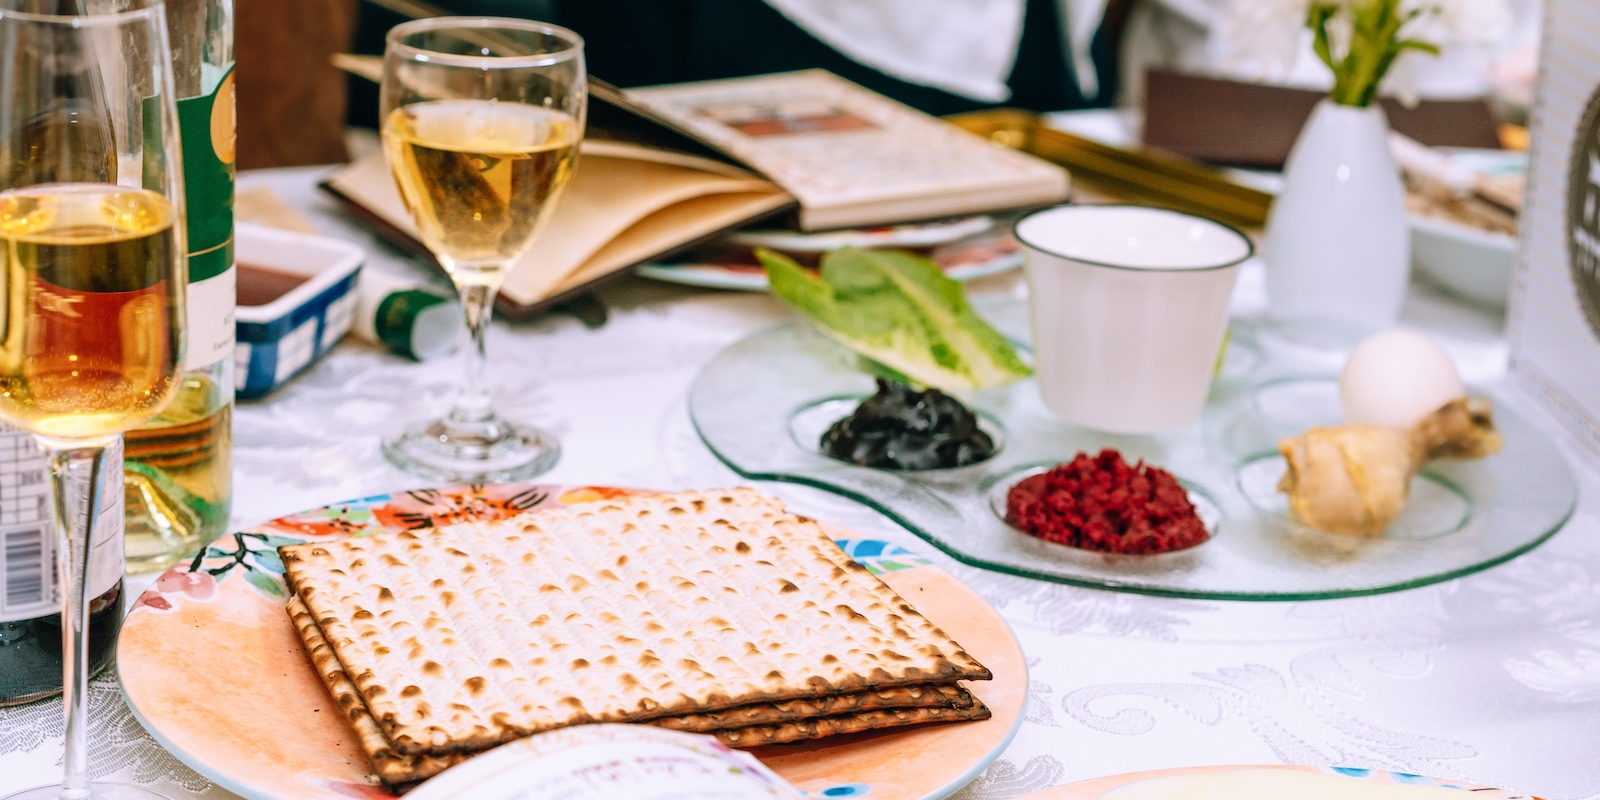 Passover table setting with a traditional Passover seder plate with symbolic meal, matzah and Haggadah.